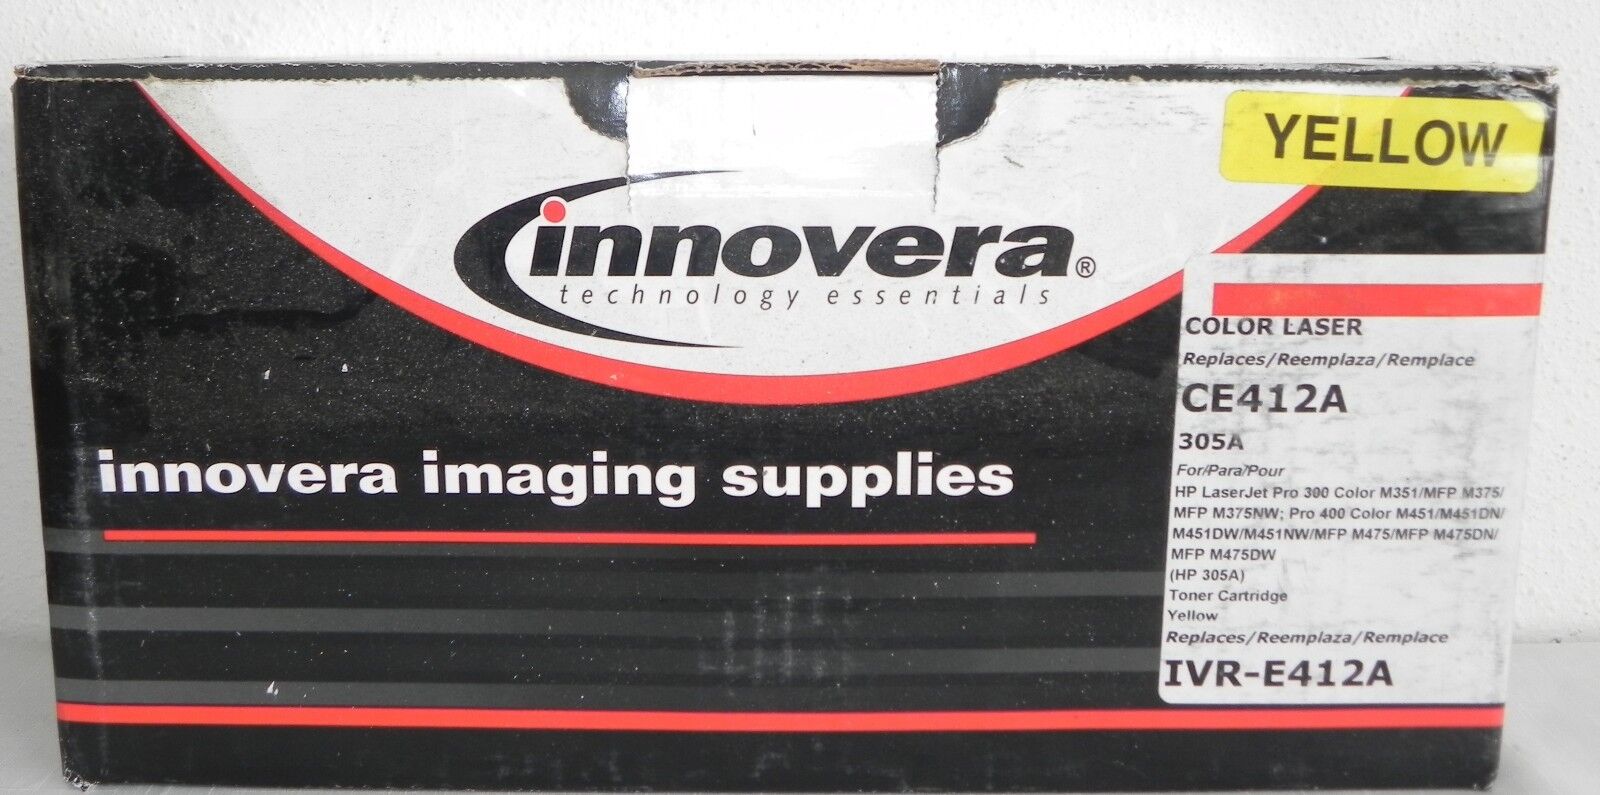 Innovera Technology Essentials Color Laser CE412A 350A Yellow Toner Cartridge 